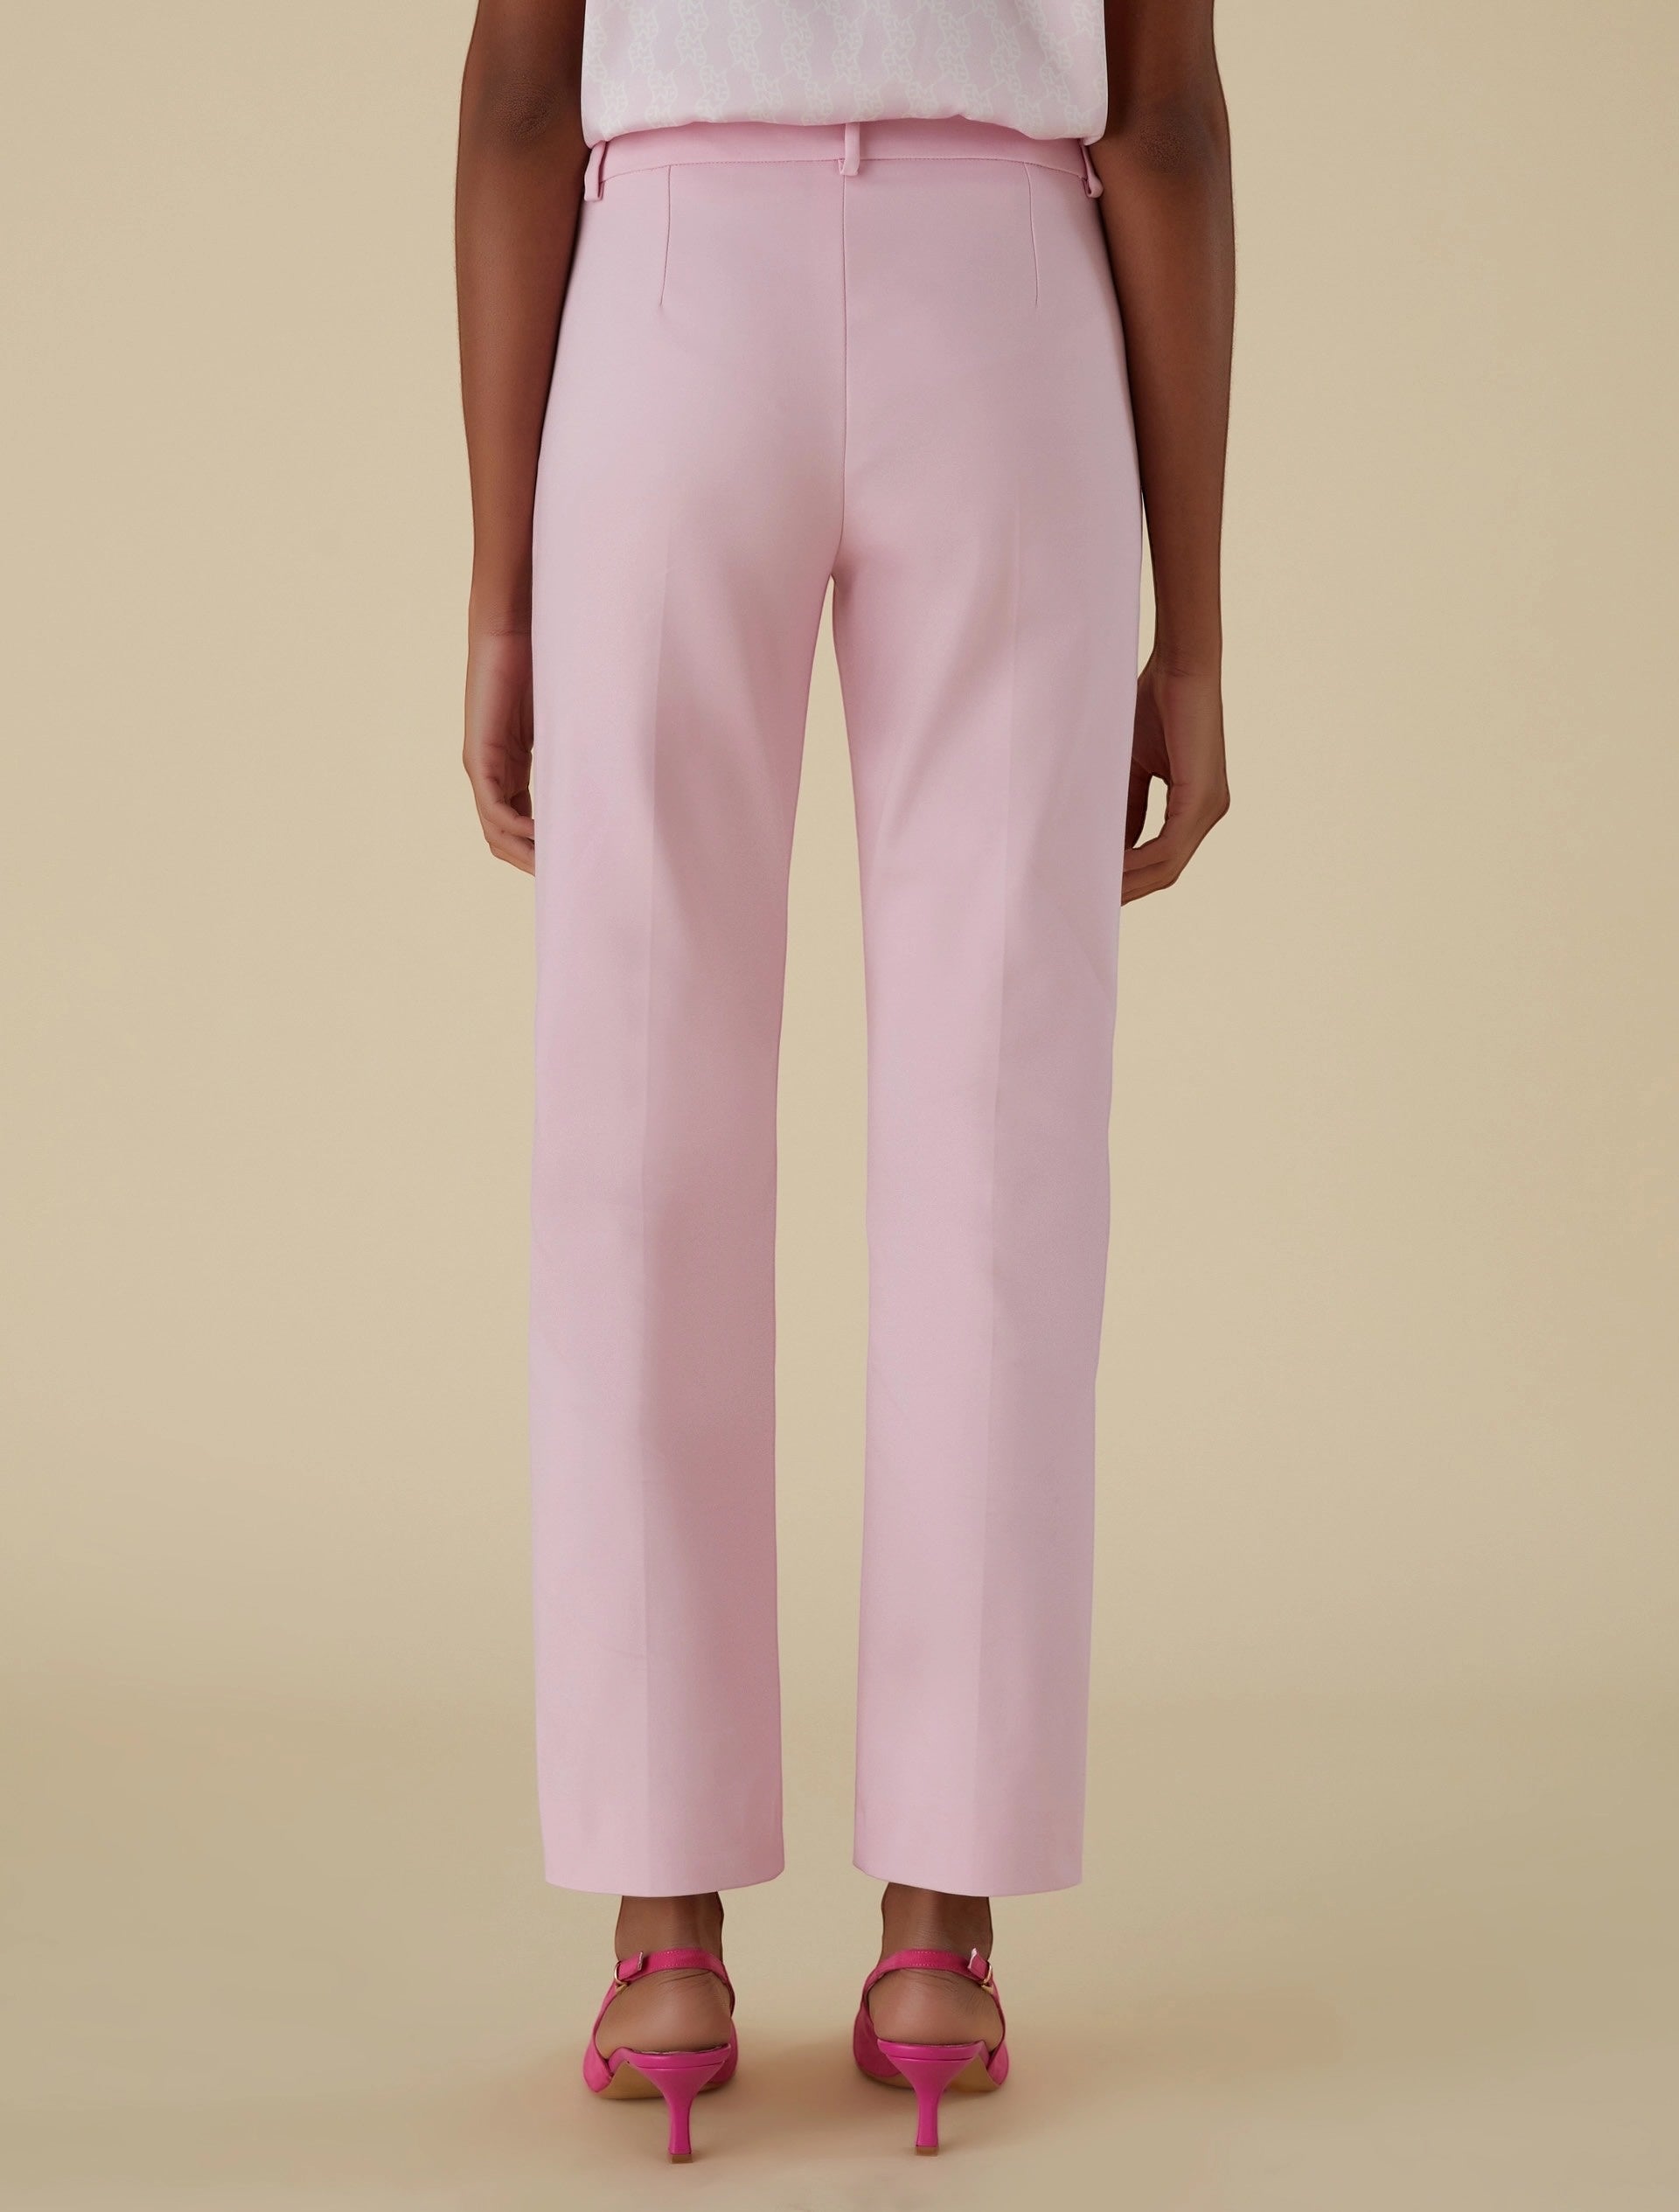 Valenza Pastel Pink Trousers